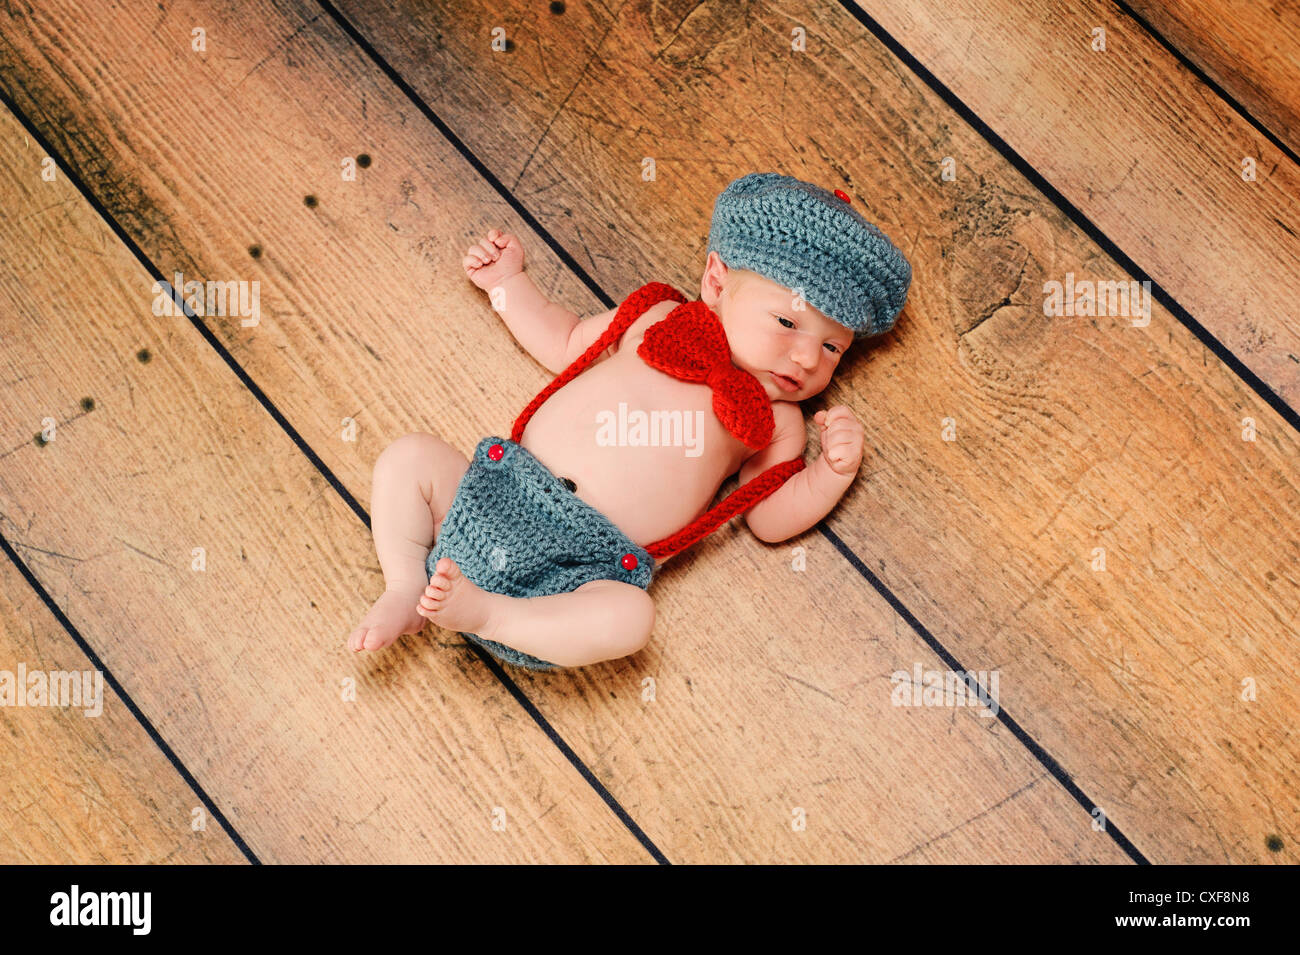 11 day old newborn baby boy wearing a vintage inspired gray and red 'little man' suit with suspenders, bow tie and hat. Stock Photo